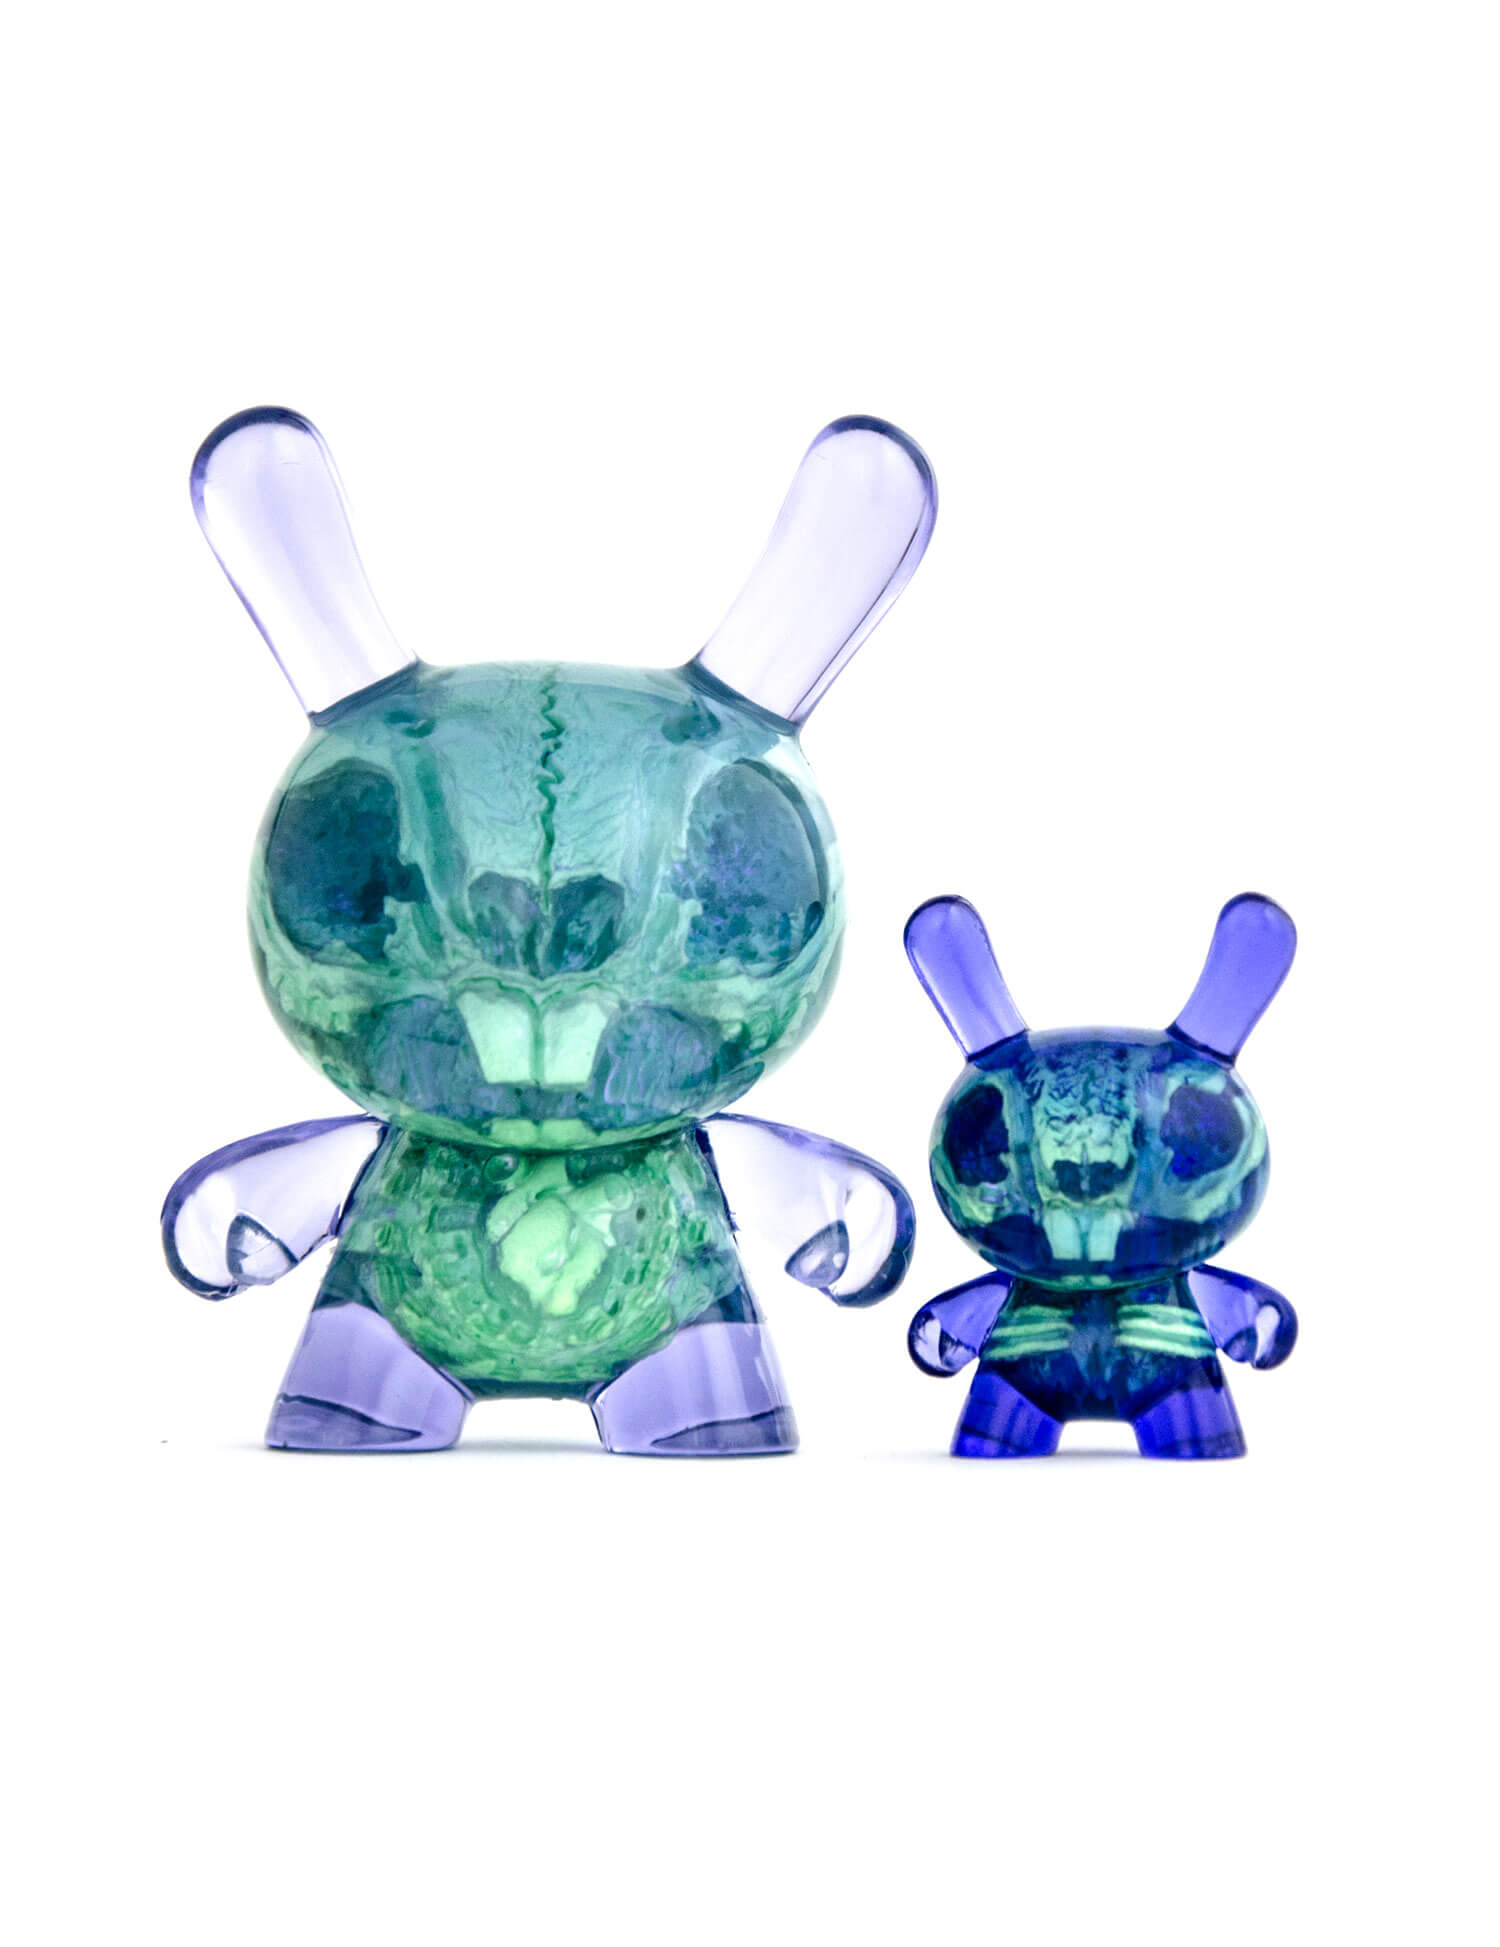 infected-dunny